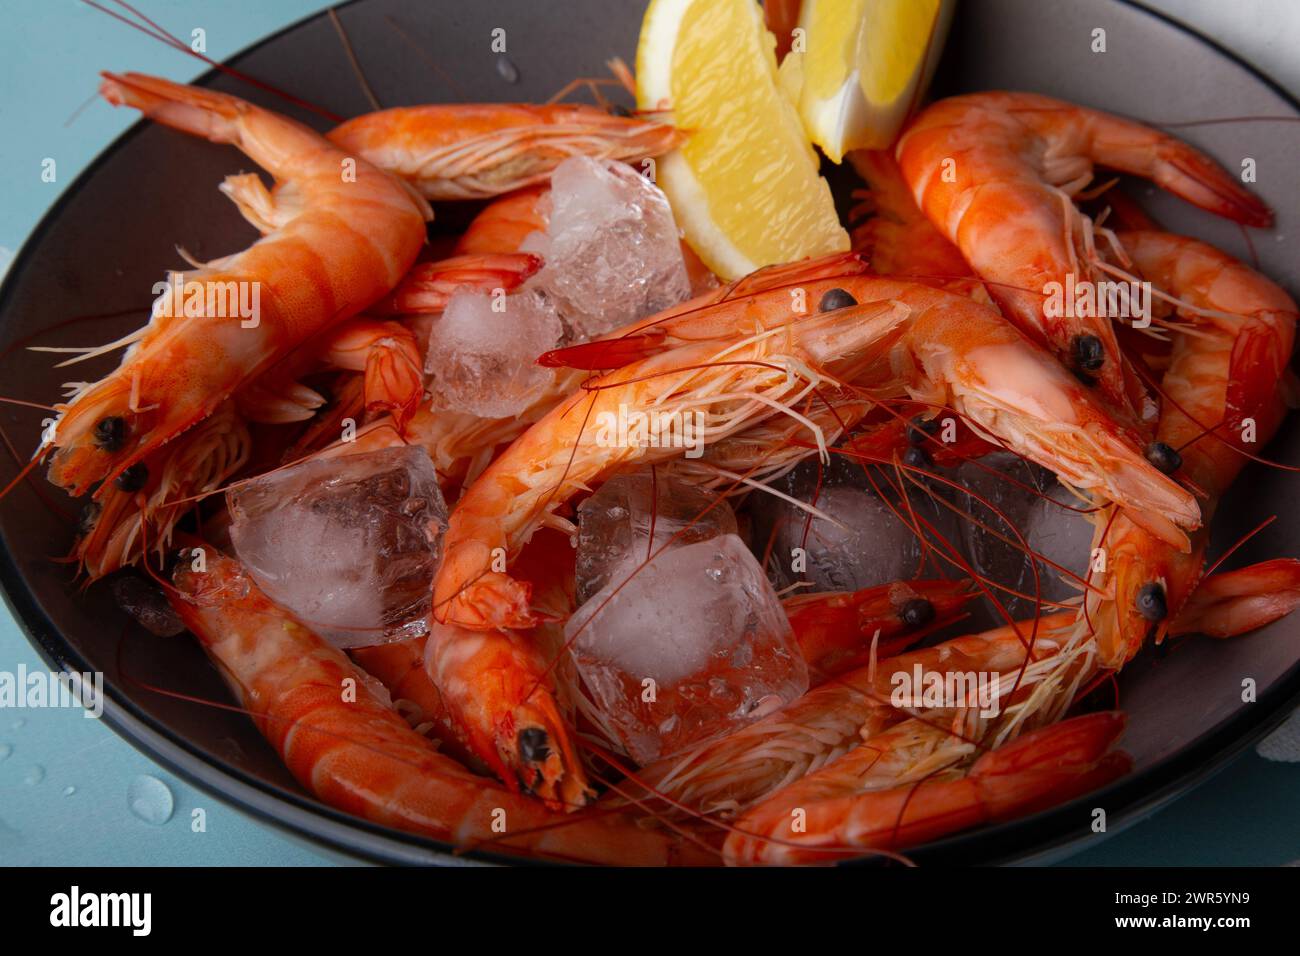 Cooked prawns on ice, with lemon, summer meal, lifestyle and cooking magazines concept. Stock Photo